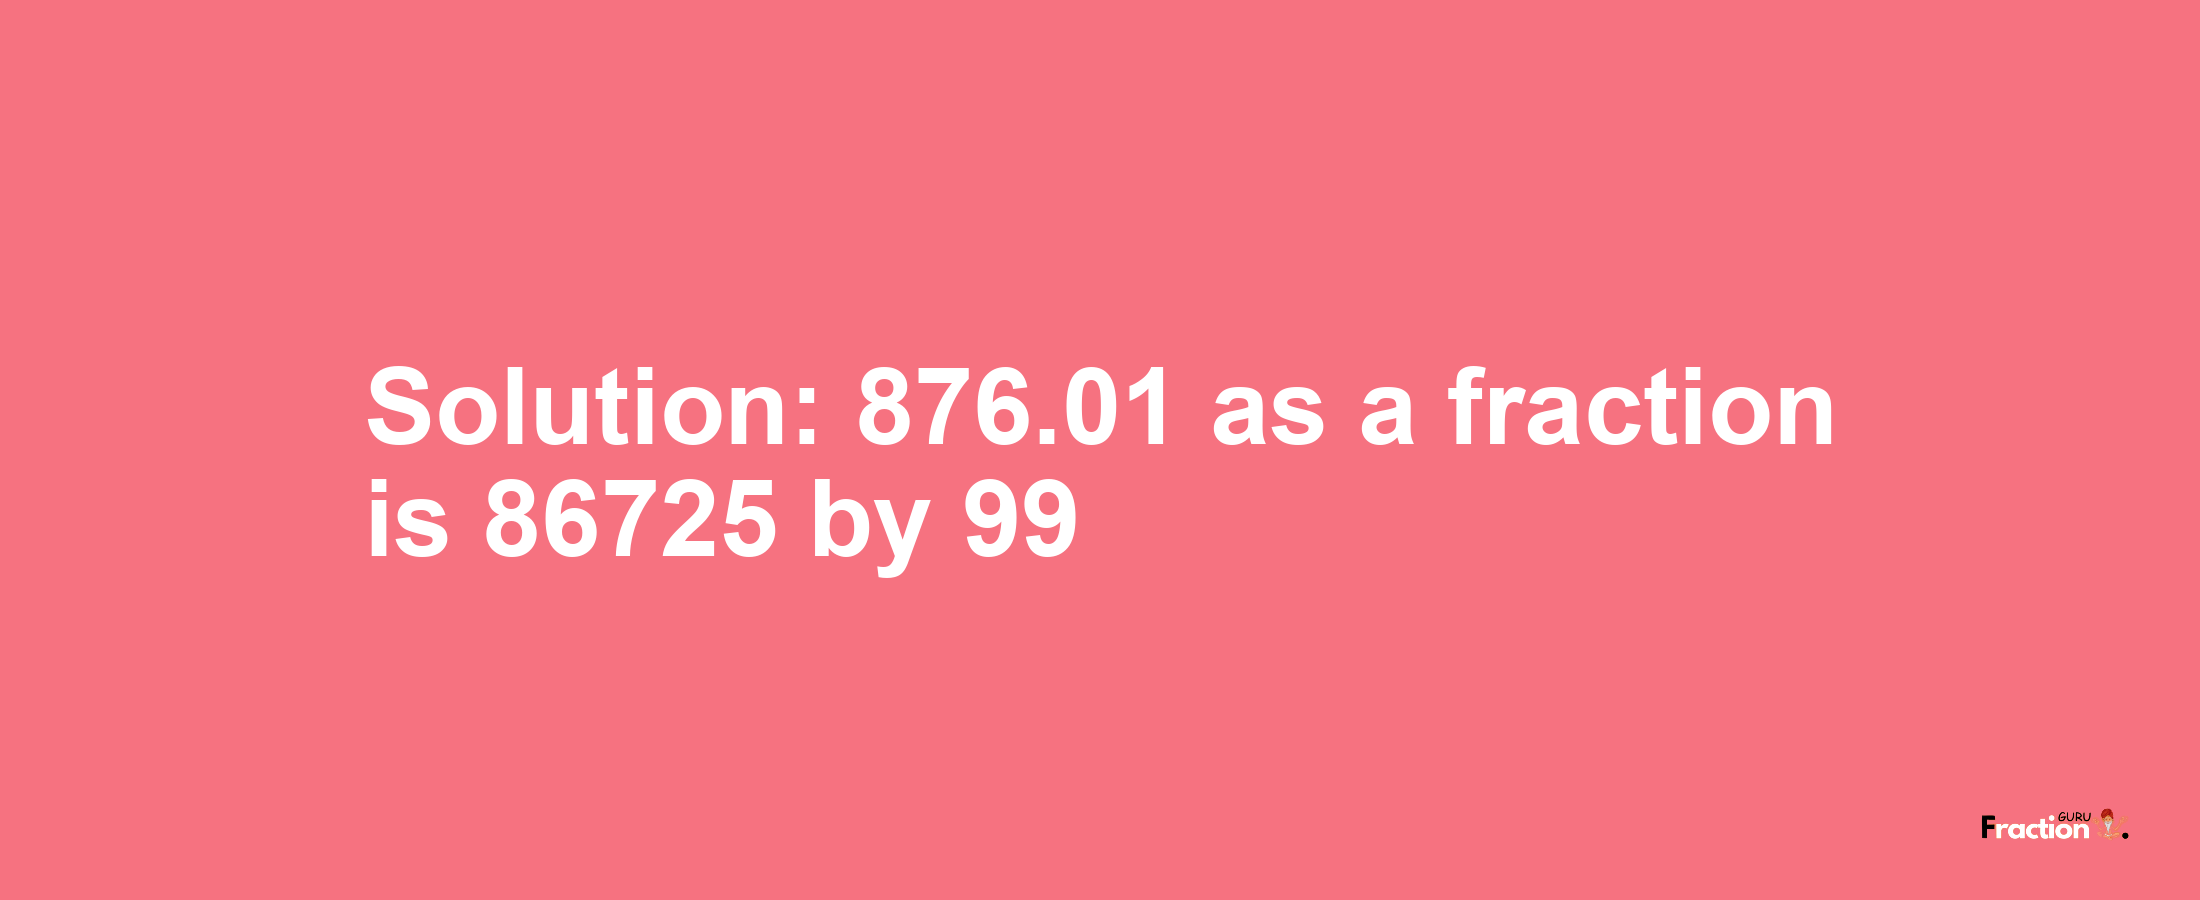 Solution:876.01 as a fraction is 86725/99